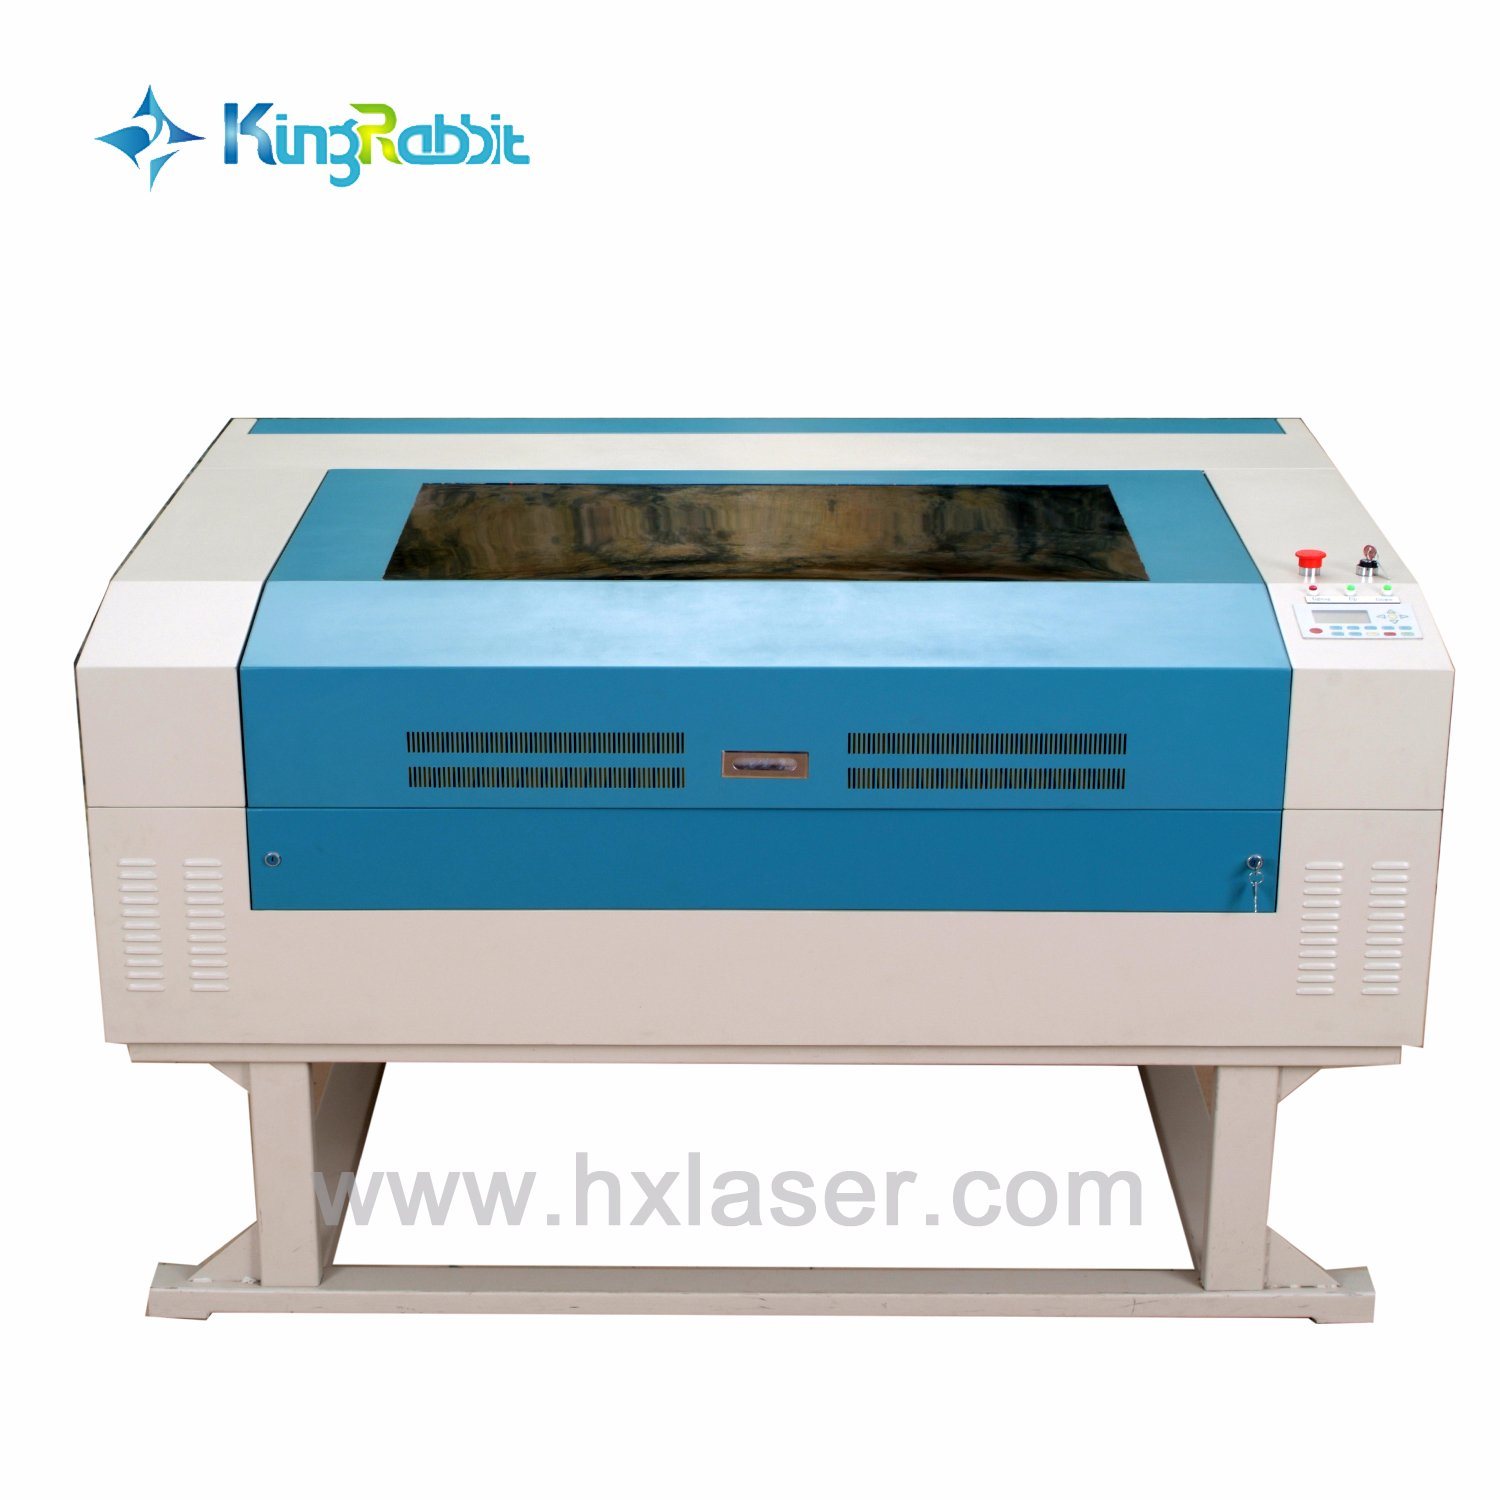 Hot Sale Plywood Laser Engraving and Cutting Machine 1610